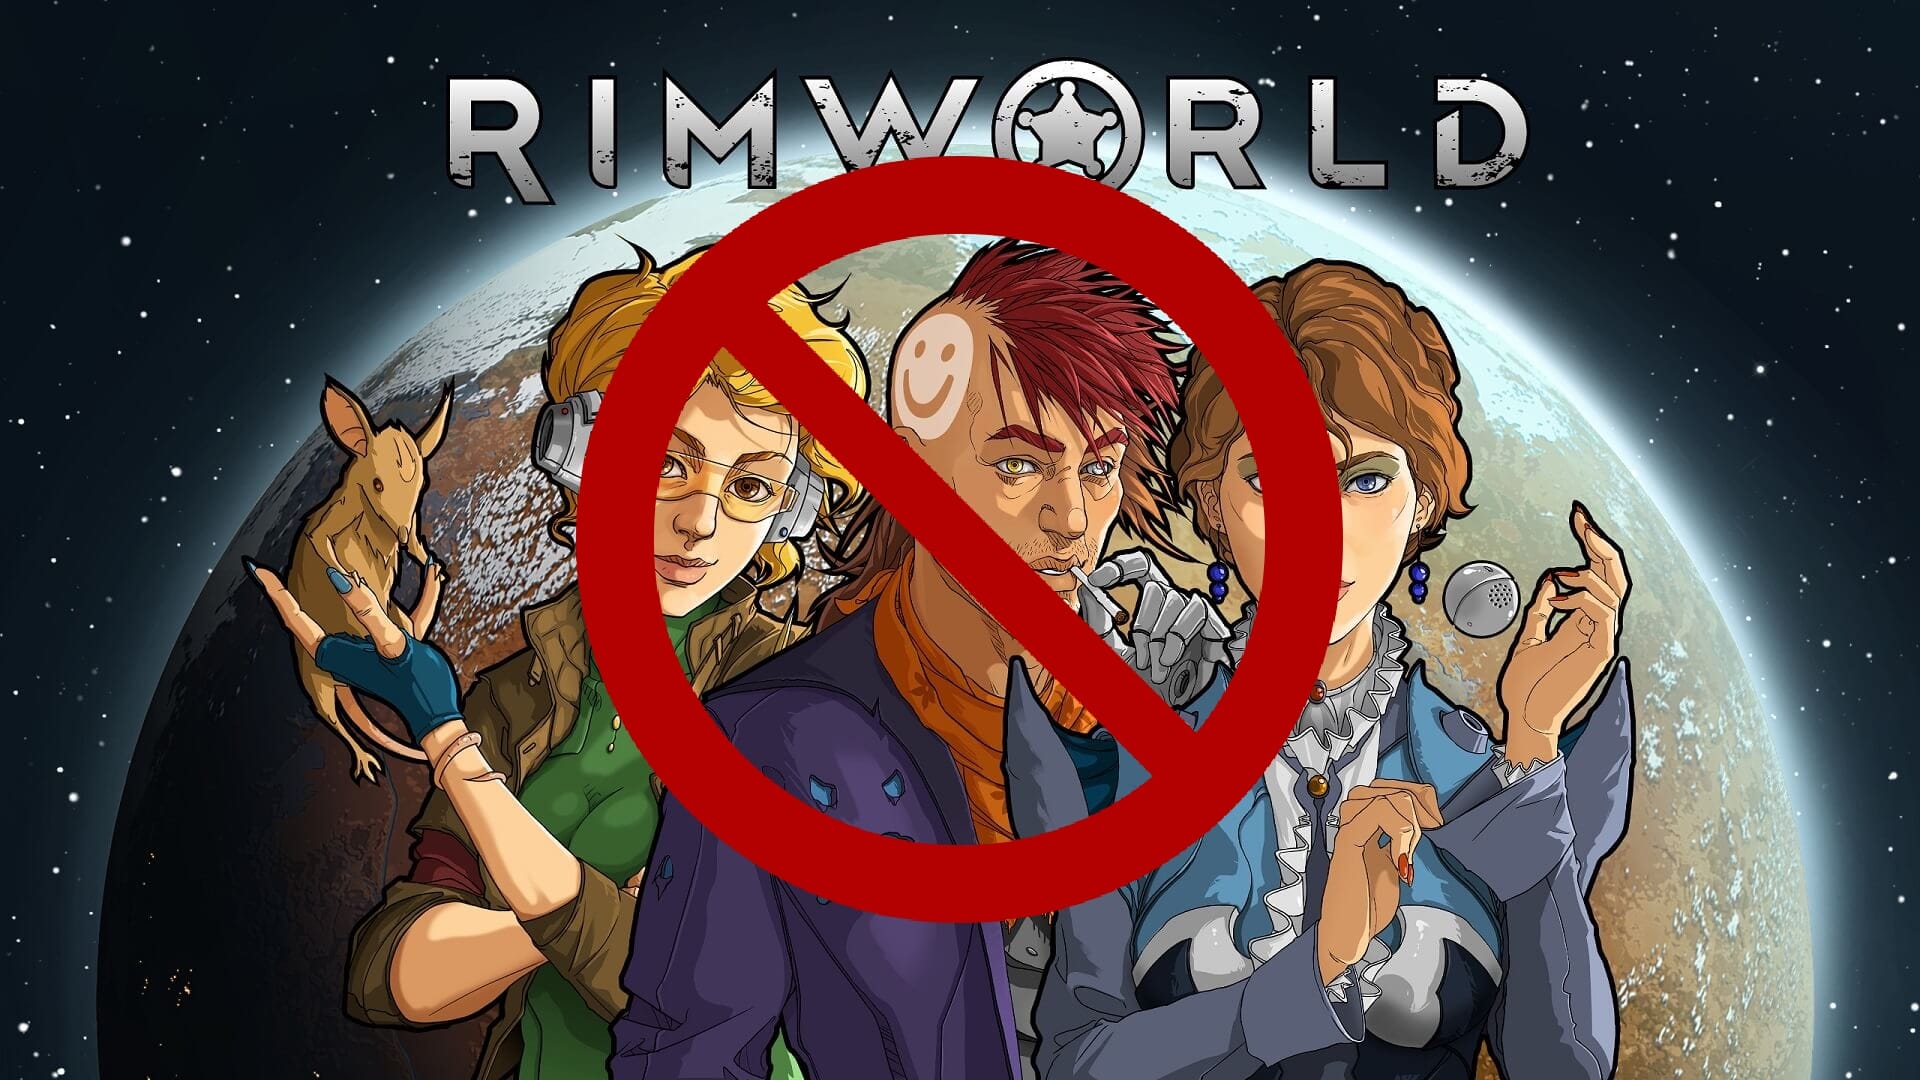 RimWorld art with a red circle with line